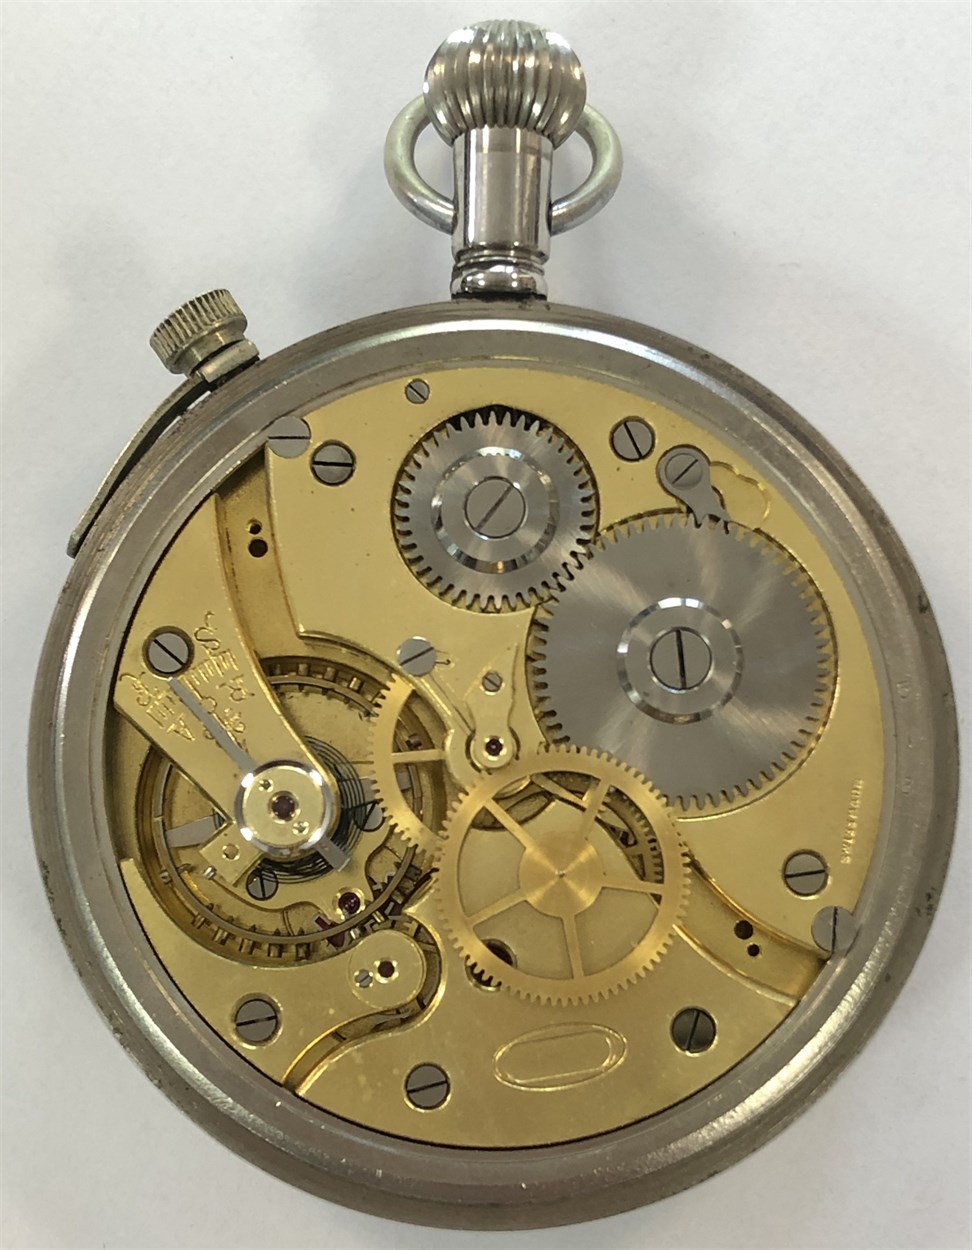 Hector Golay - A WWII Fleet Air Arm instrument watch, - Image 5 of 5